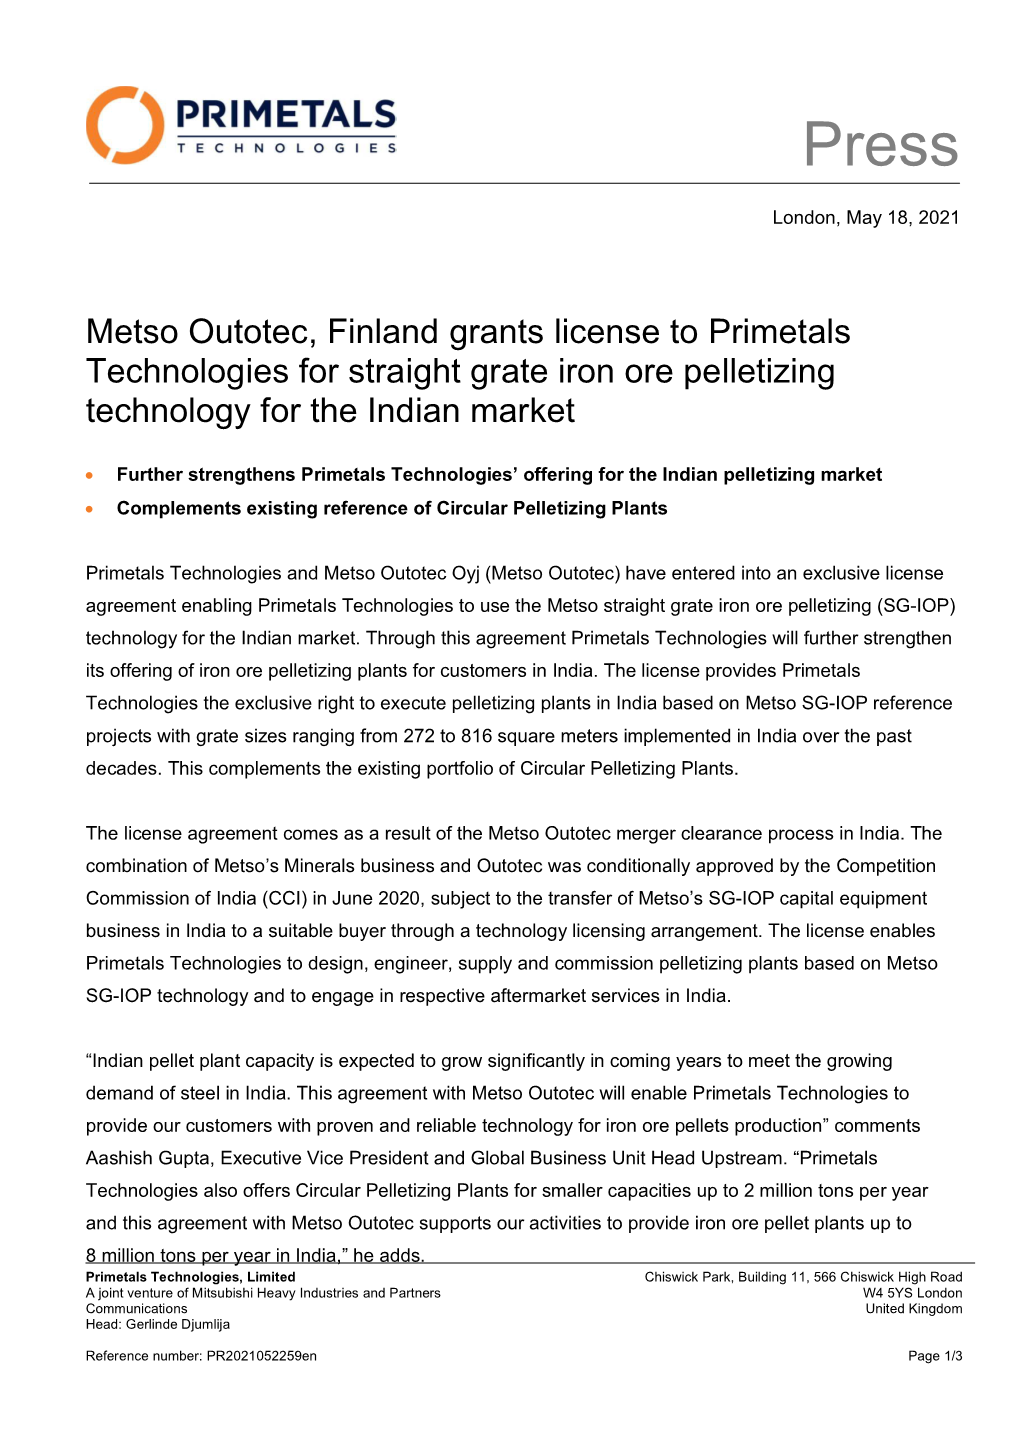 Metso Outotec, Finland Grants License to Primetals Technologies for Straight Grate Iron Ore Pelletizing Technology for the Indian Market